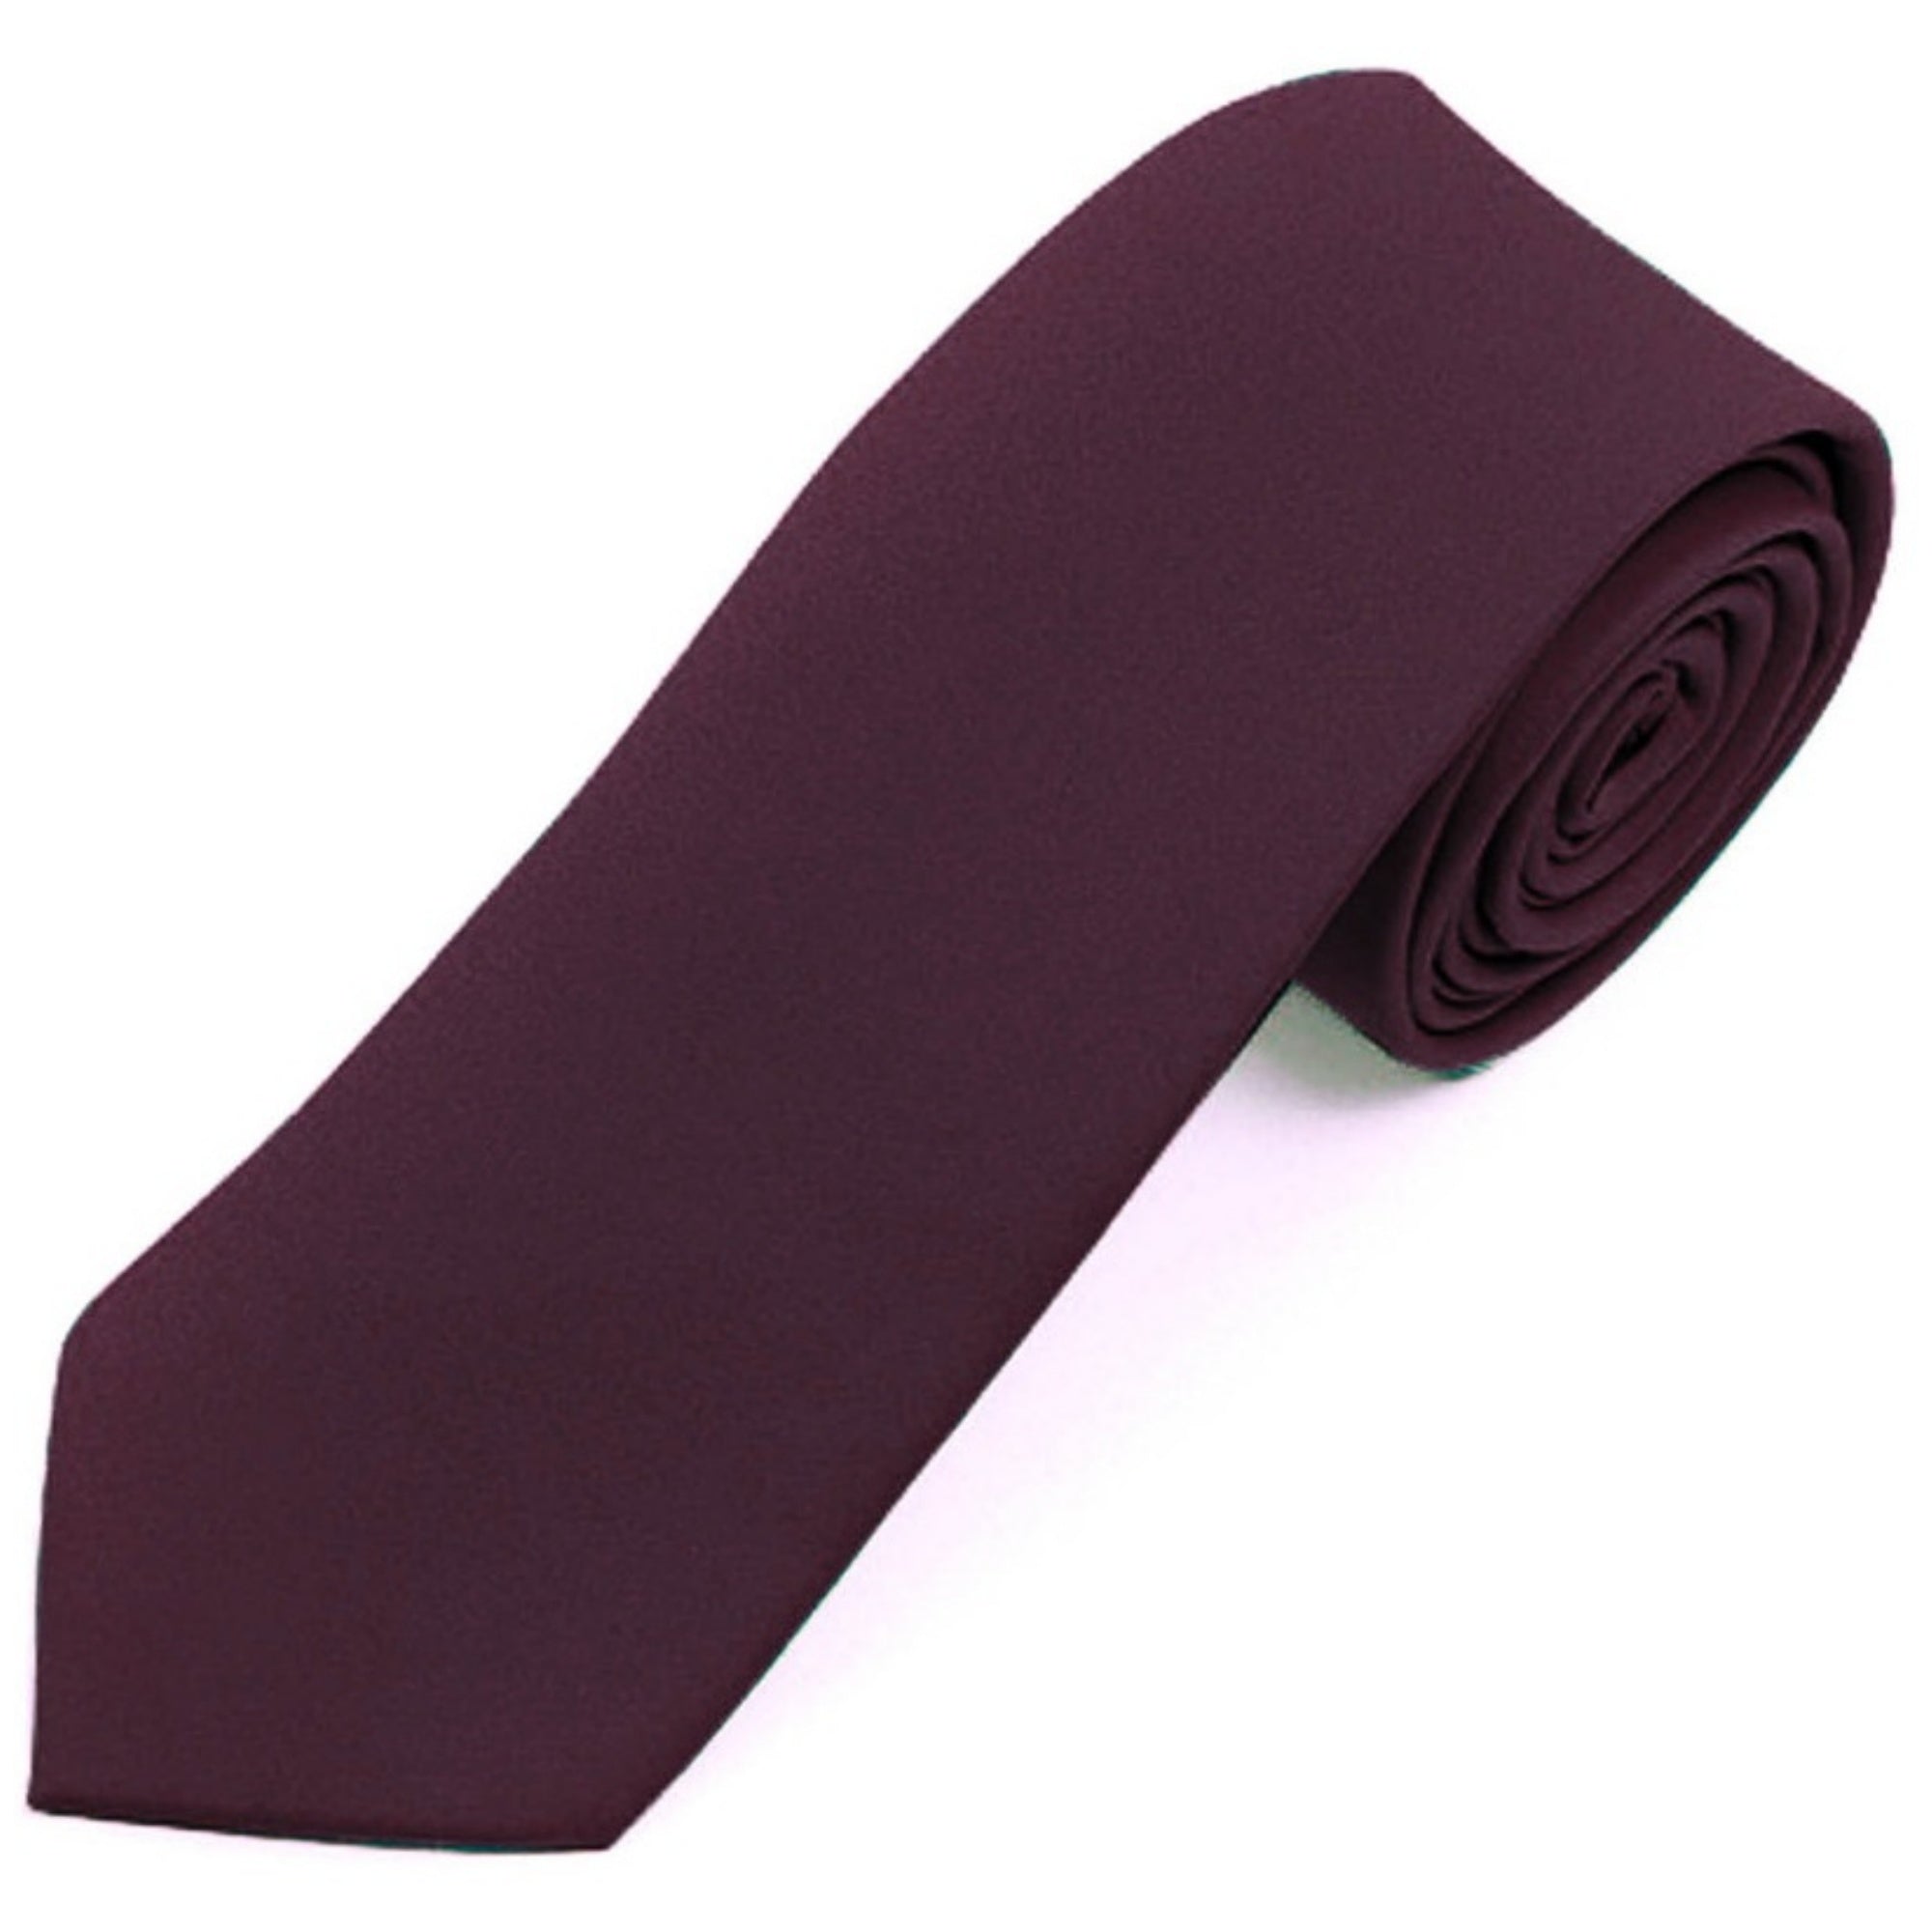 Men's Solid Color 2 Inch Wide And 57 Inch Long Slim Neckties Neck Tie TheDapperTie Dark Burgundy 57" long and 2" wide 